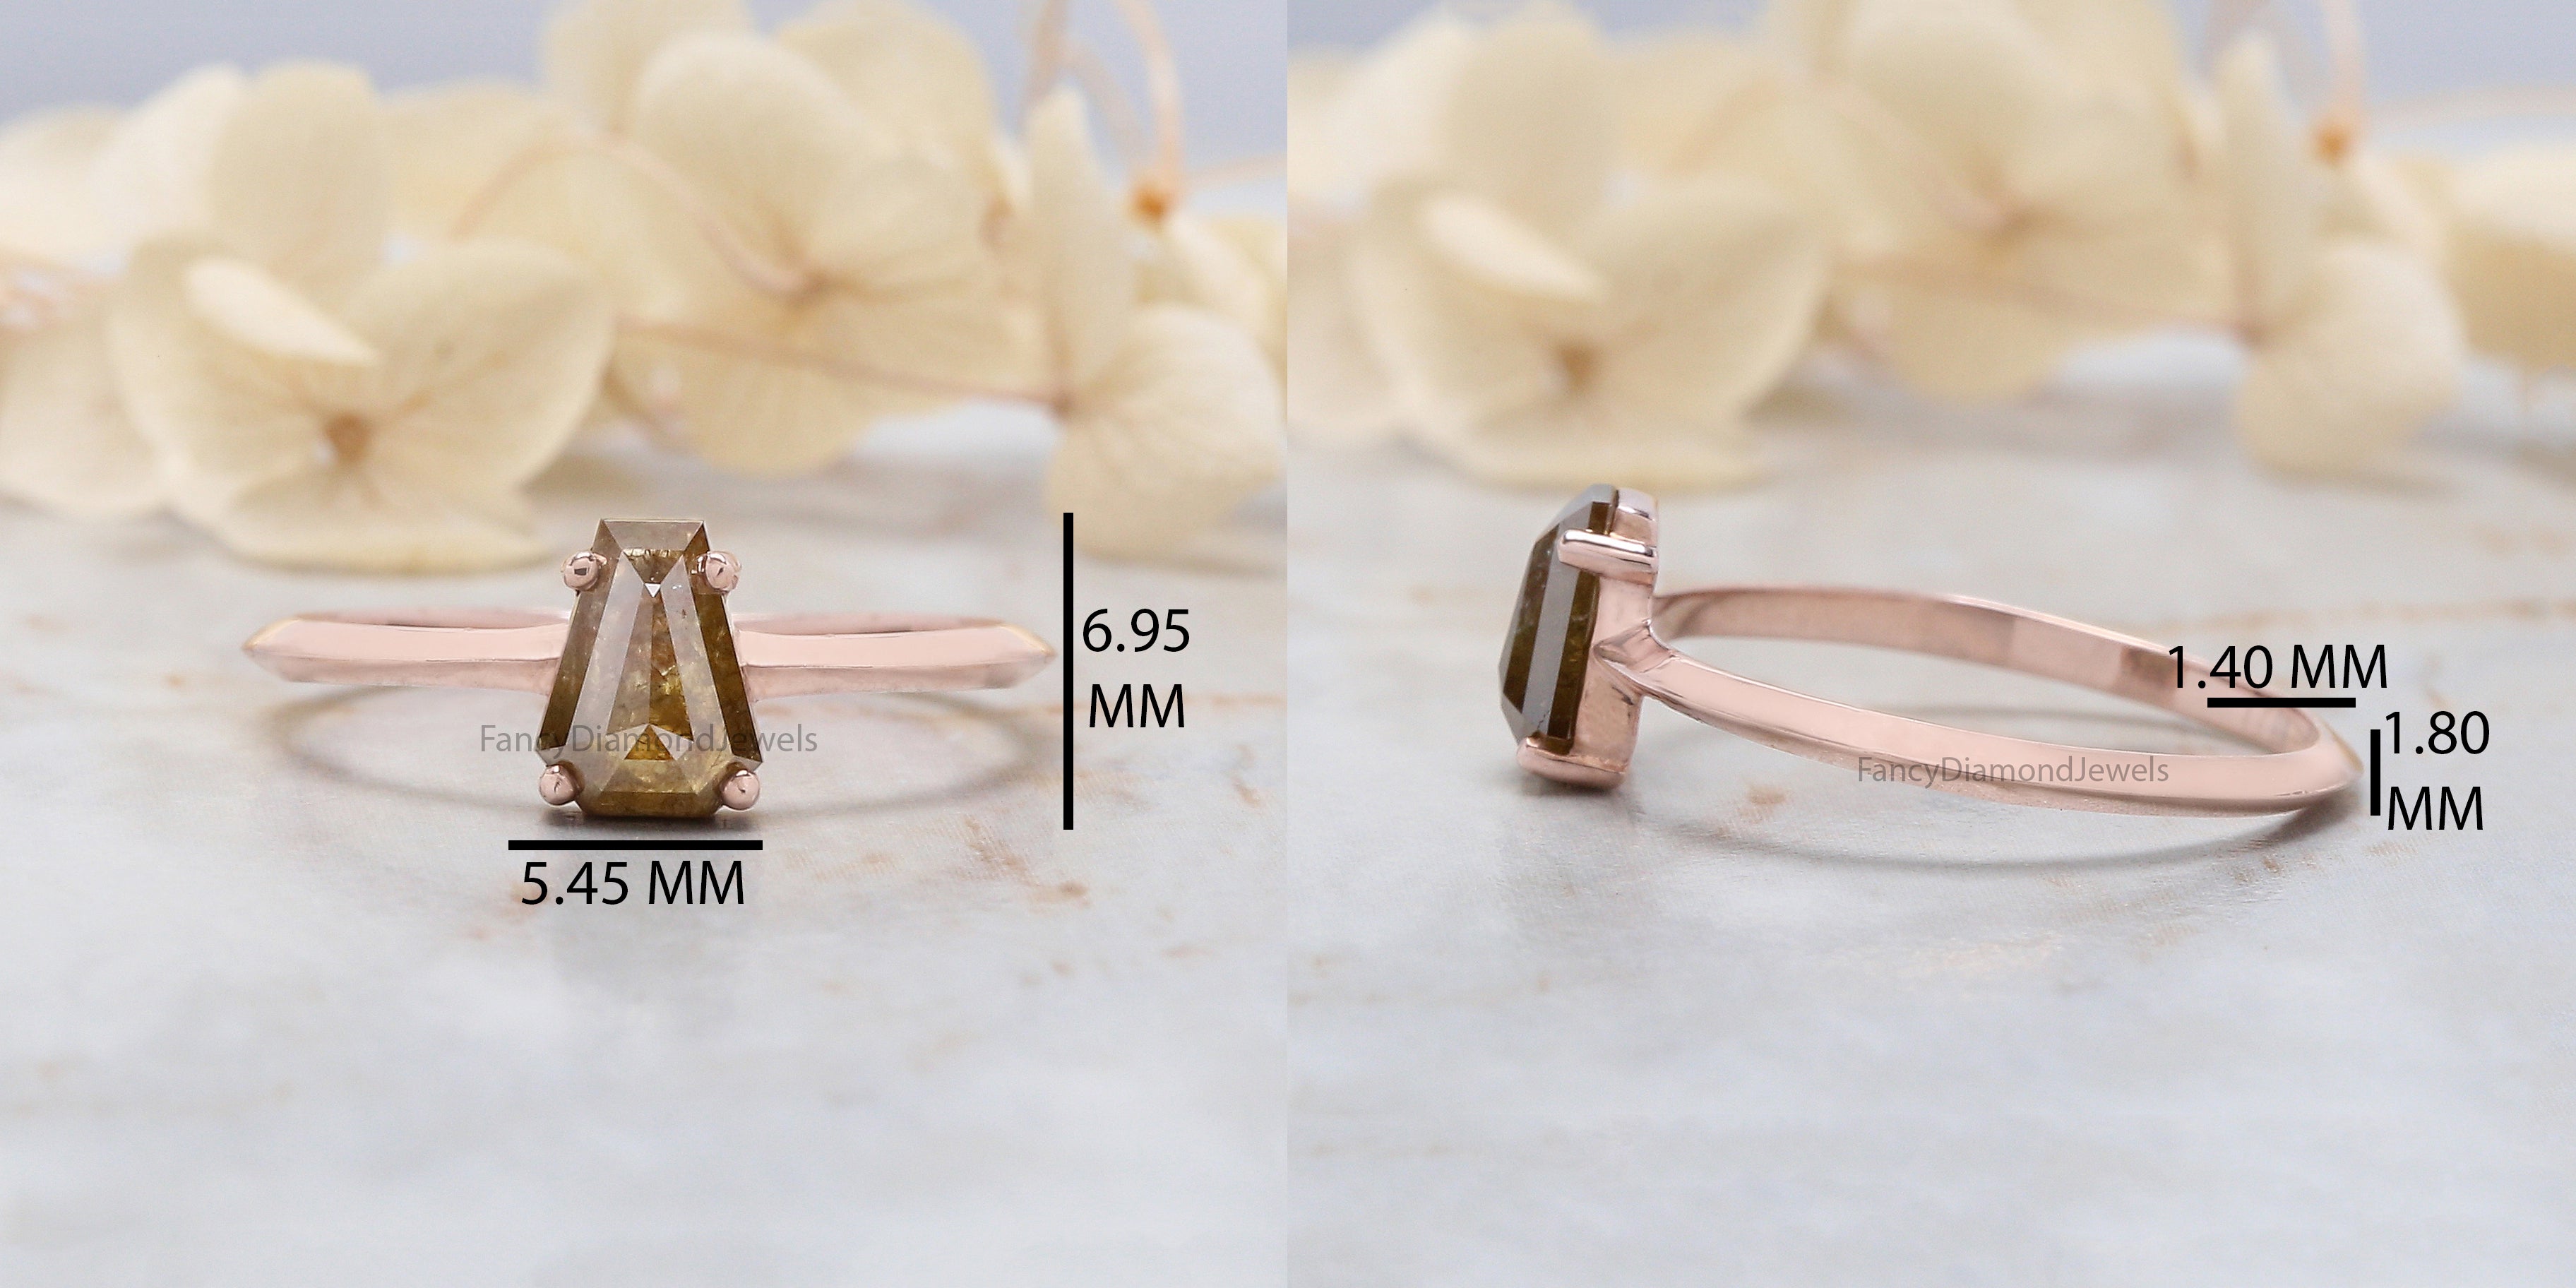 Coffin Cut Brown Color Diamond Ring 0.82 Ct 6.90 MM Coffin Diamond Ring 14K Solid Rose Gold Silver Engagement Ring Gift For Her QN985